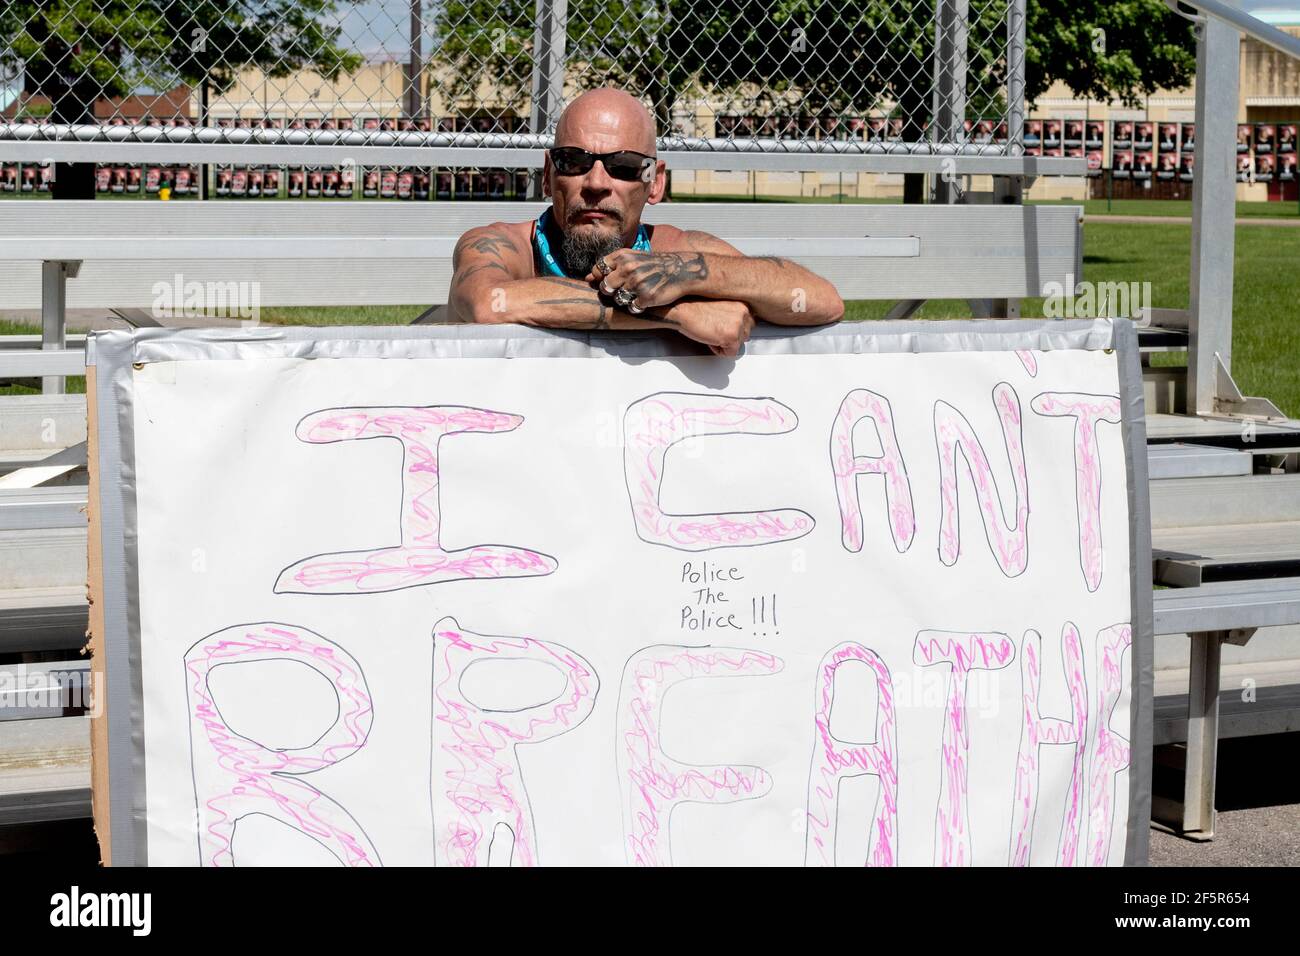 White Man at Black Lives Matter BLM Protest with I can't Breathe poster Stock Photo